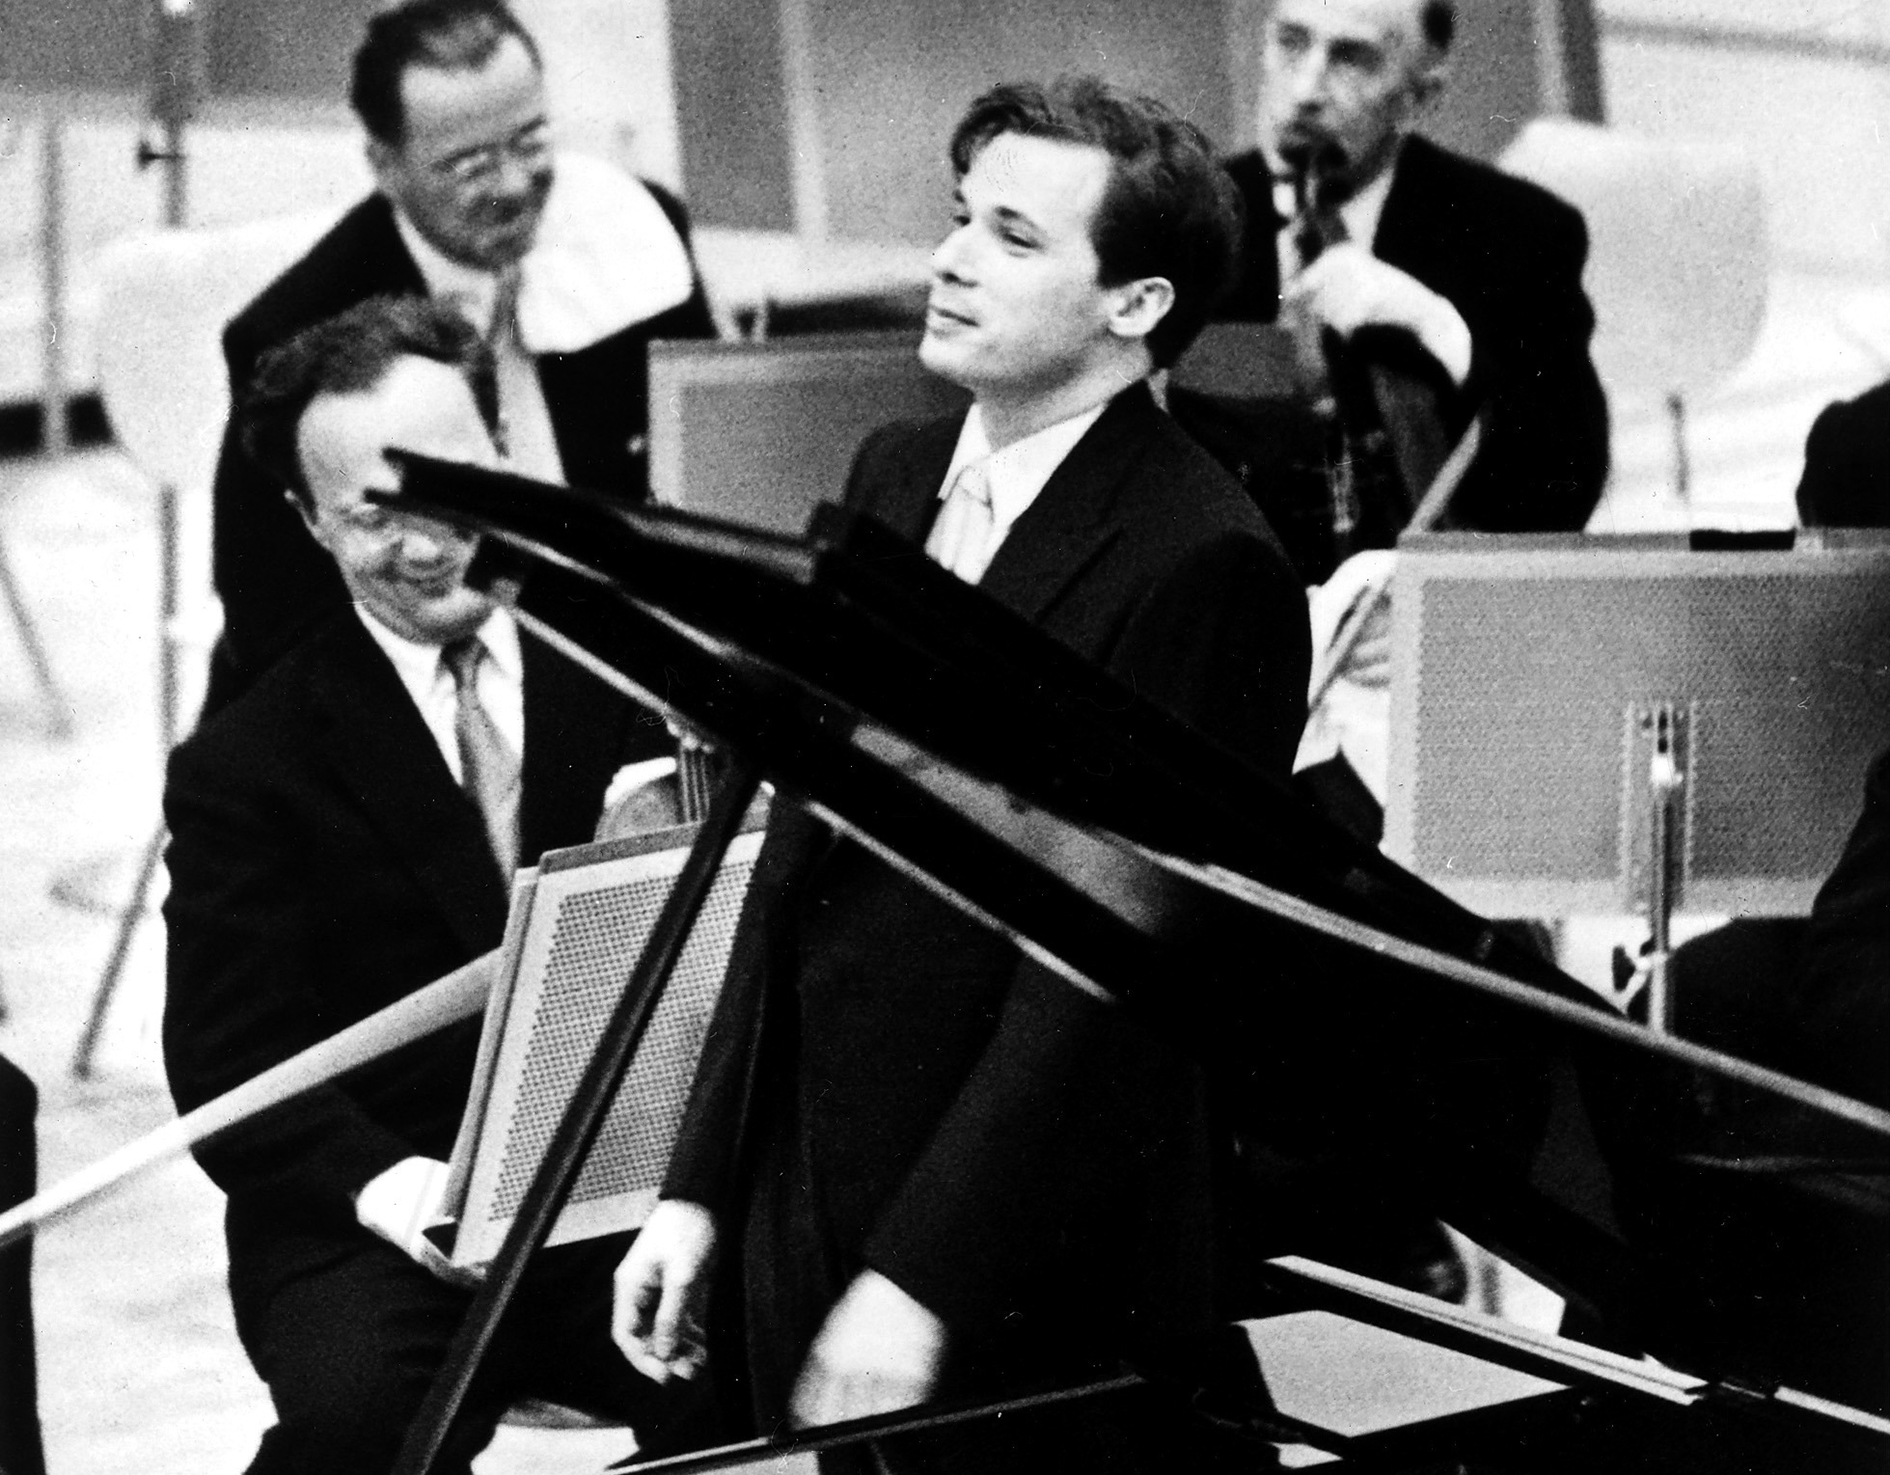 Glenn Gould remembered: Meet the man behind the genius - Classical